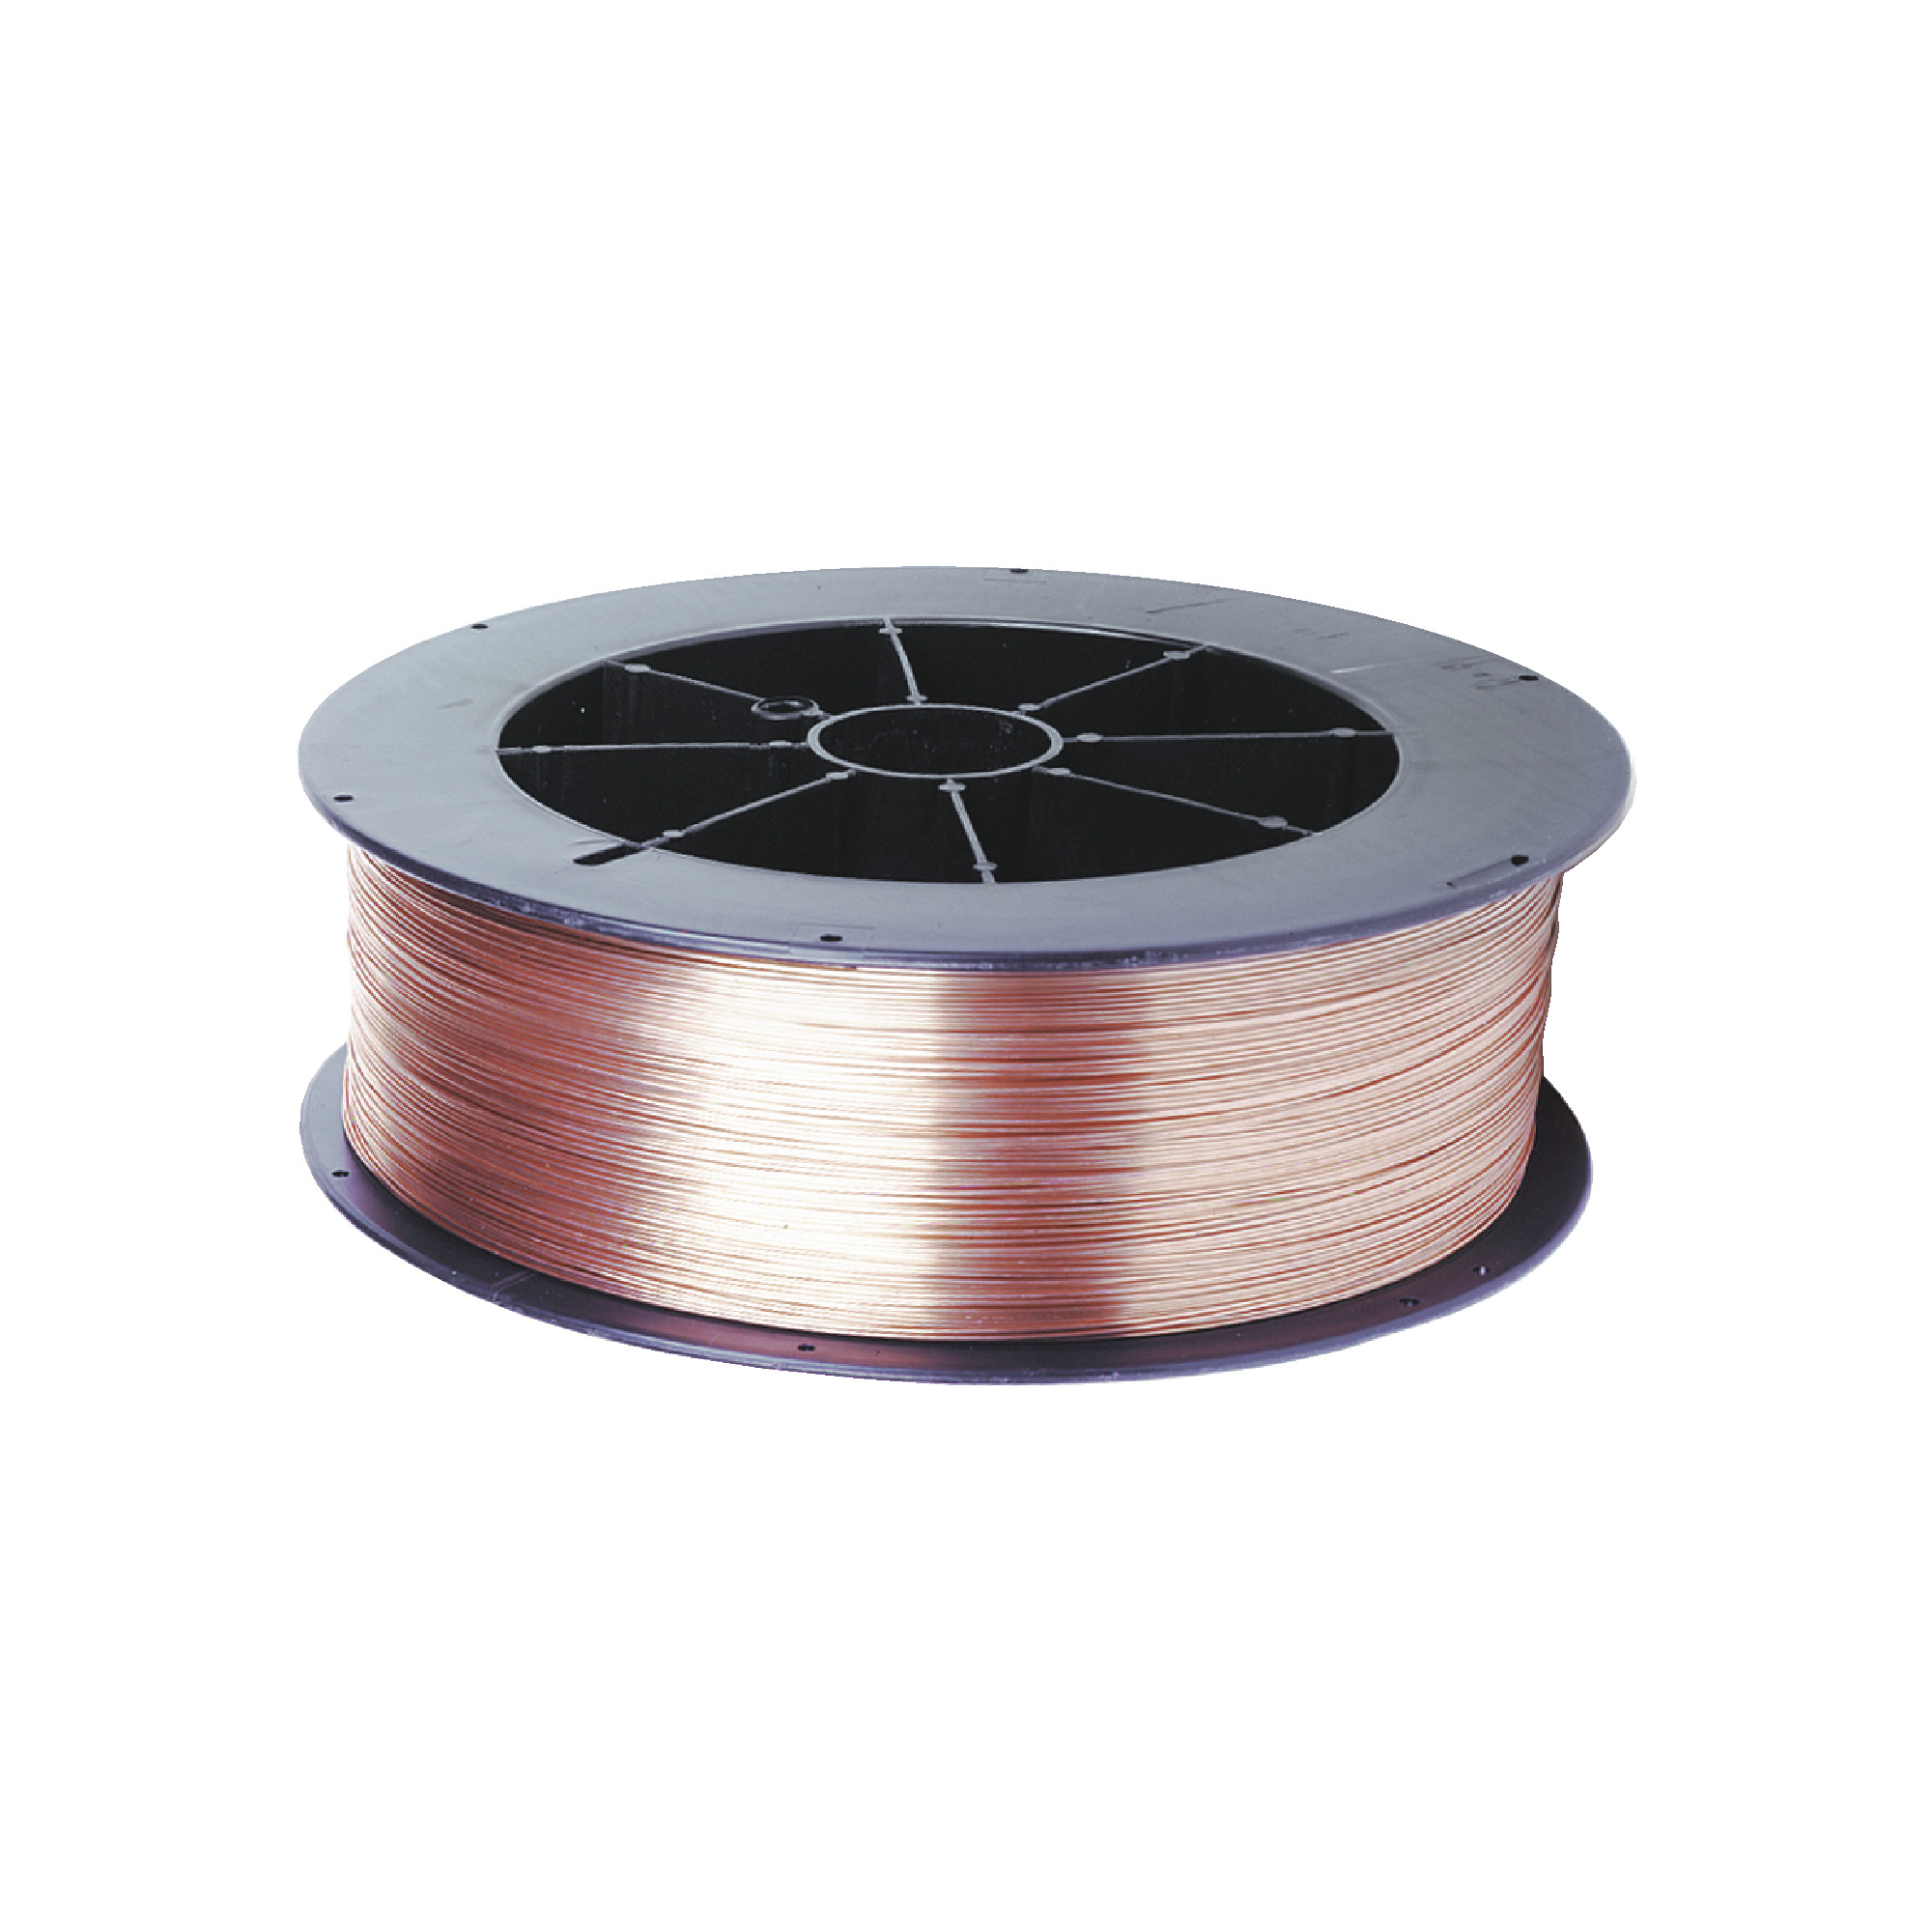 .035" ER70S-6 Super Arc L-56 Copper Coated Carbon Steel MIG Welding Wire - 12.5 lbs. Spool